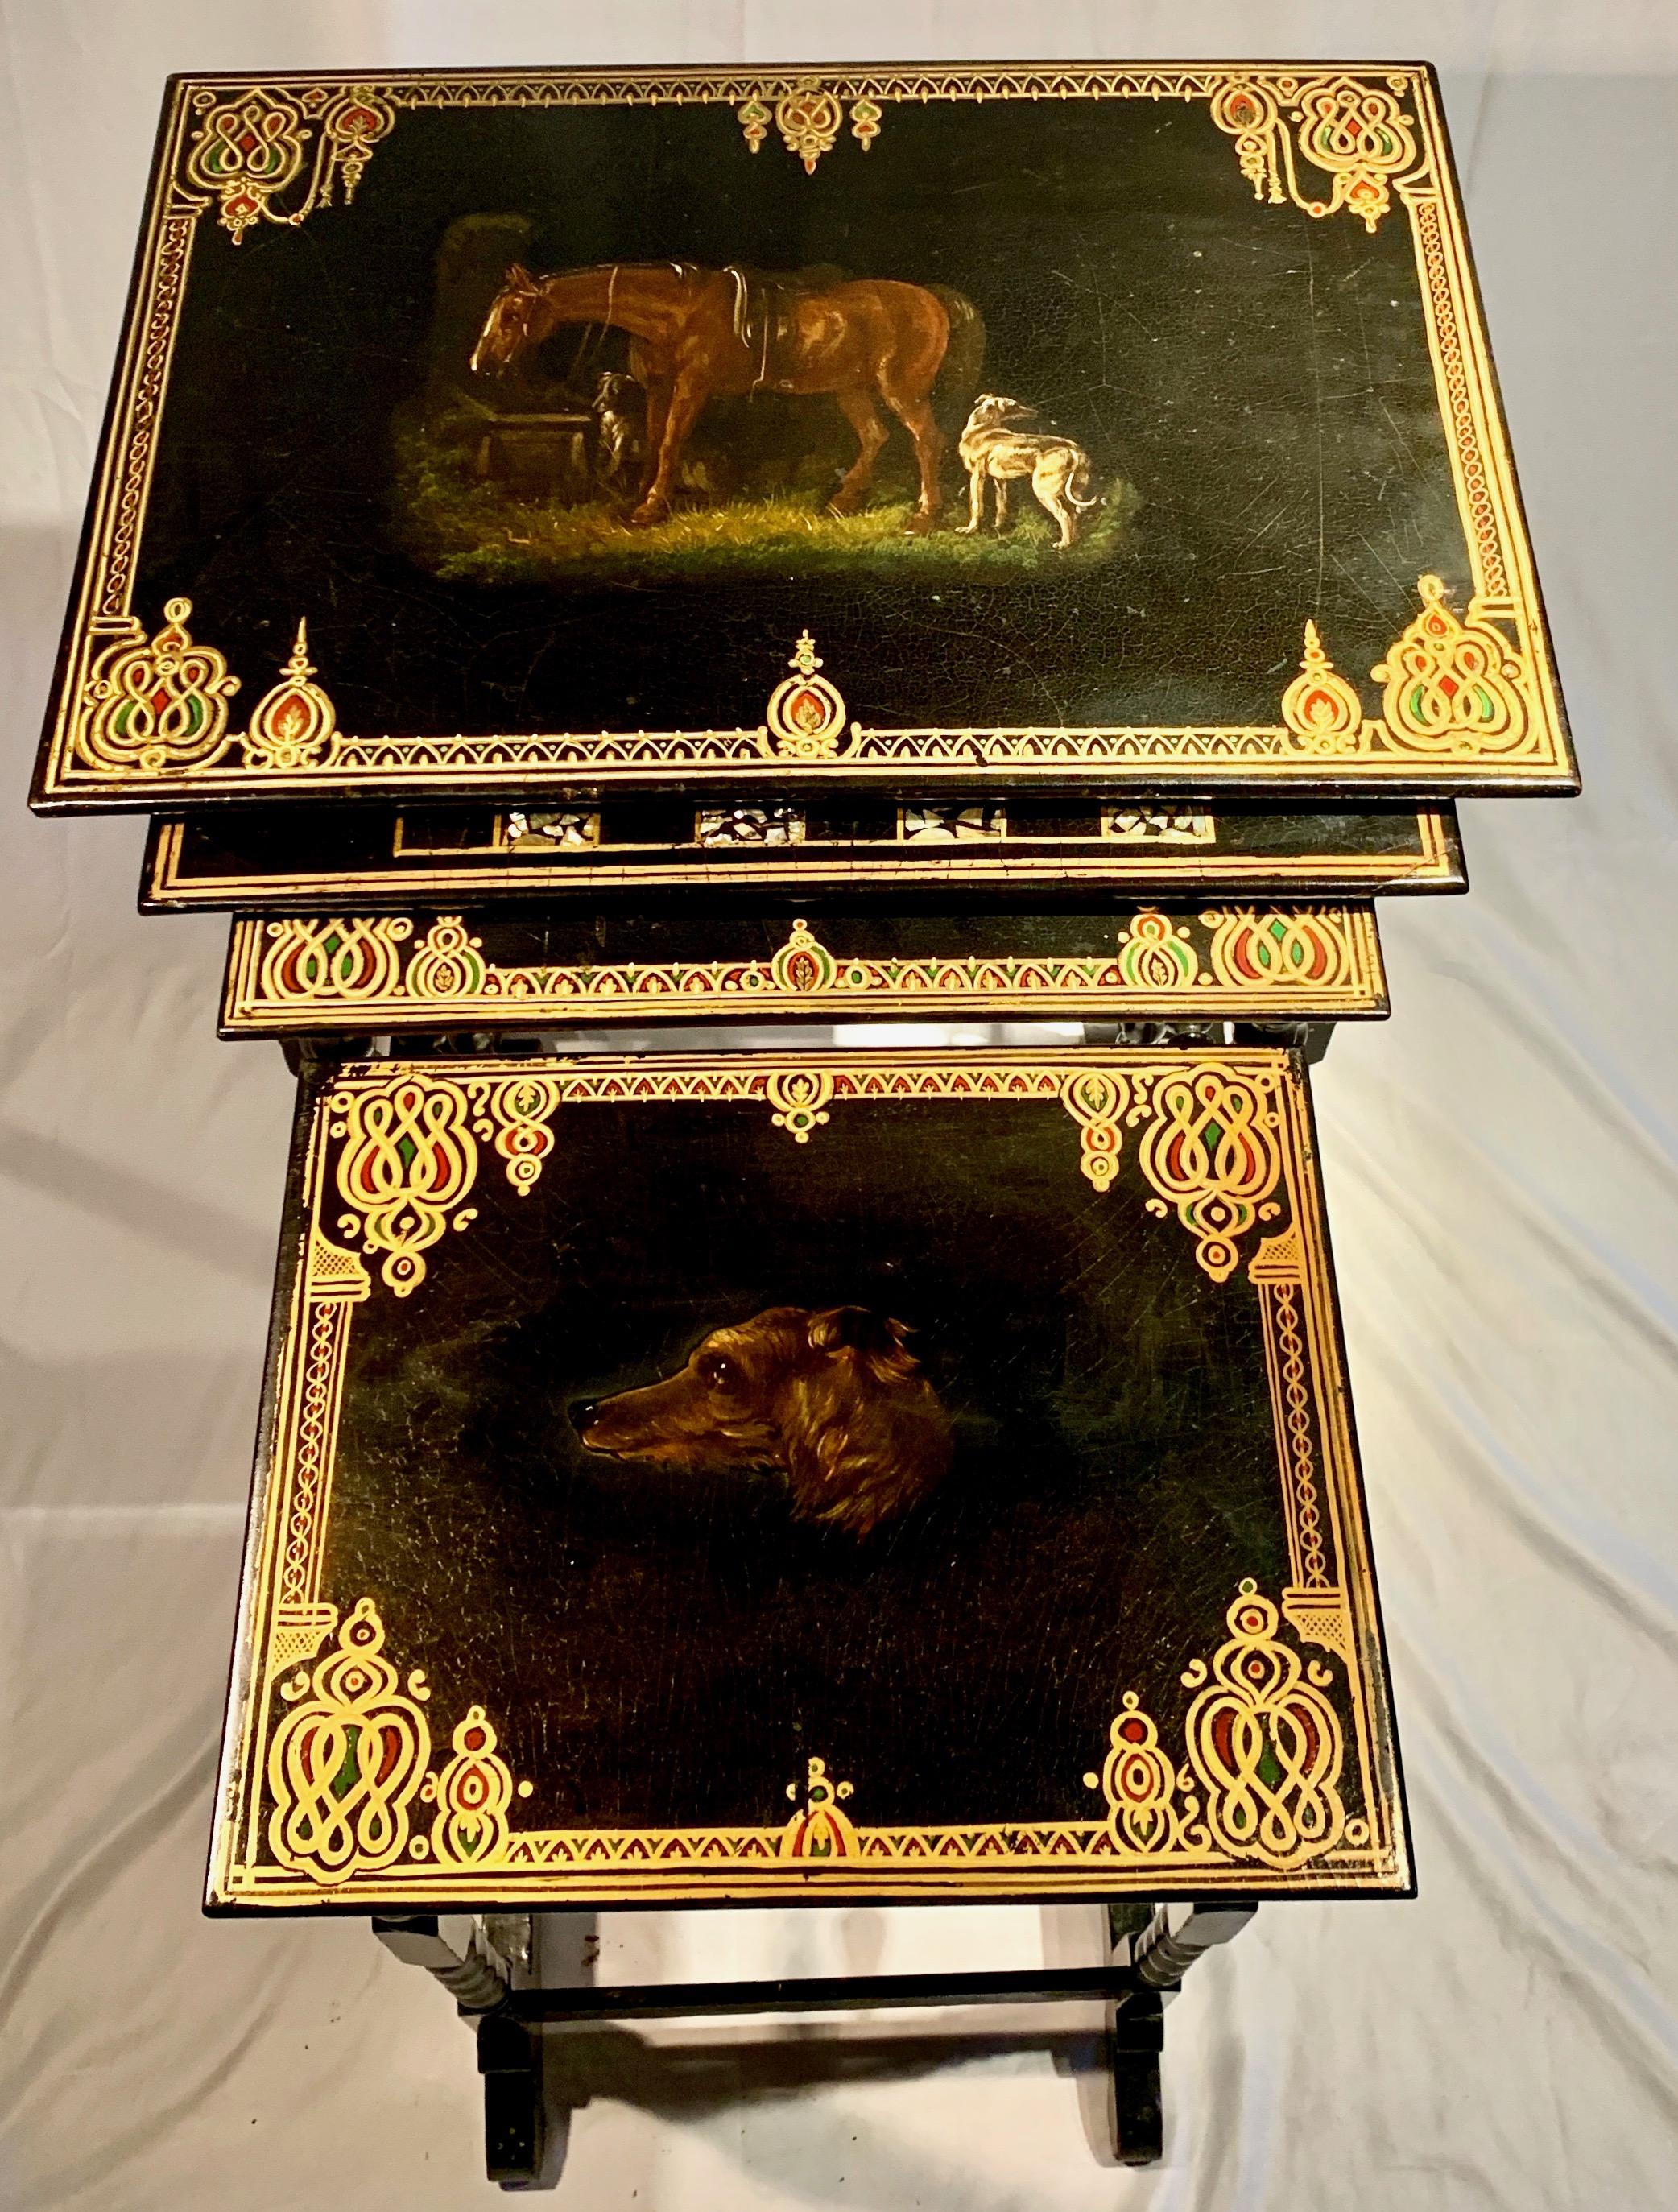 Antique nest of tables (4) Victorian lacquer, circa 1870s
